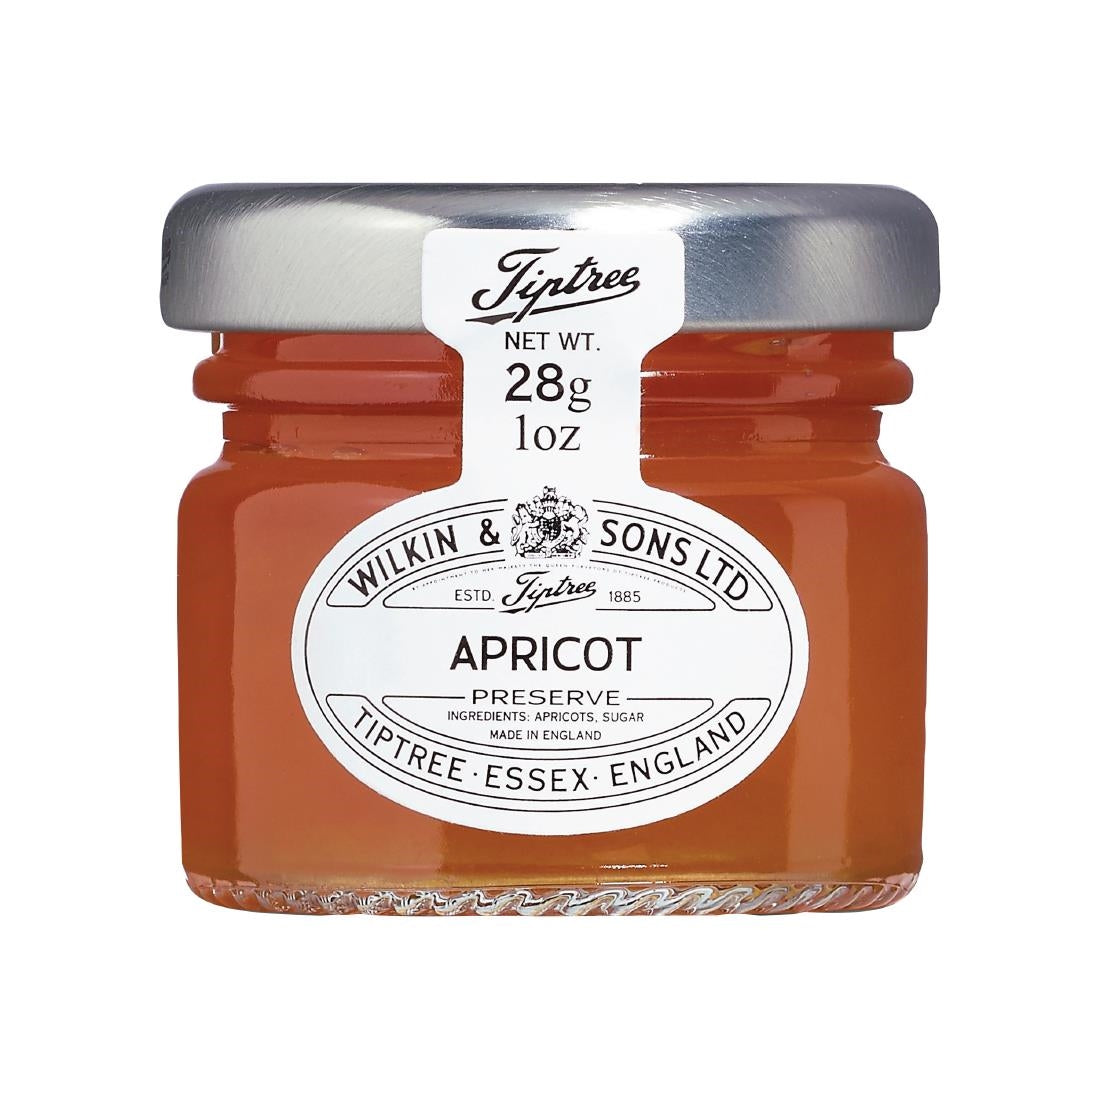 HS571 Tiptree Apricot Preserve 28g (Pack of 72)